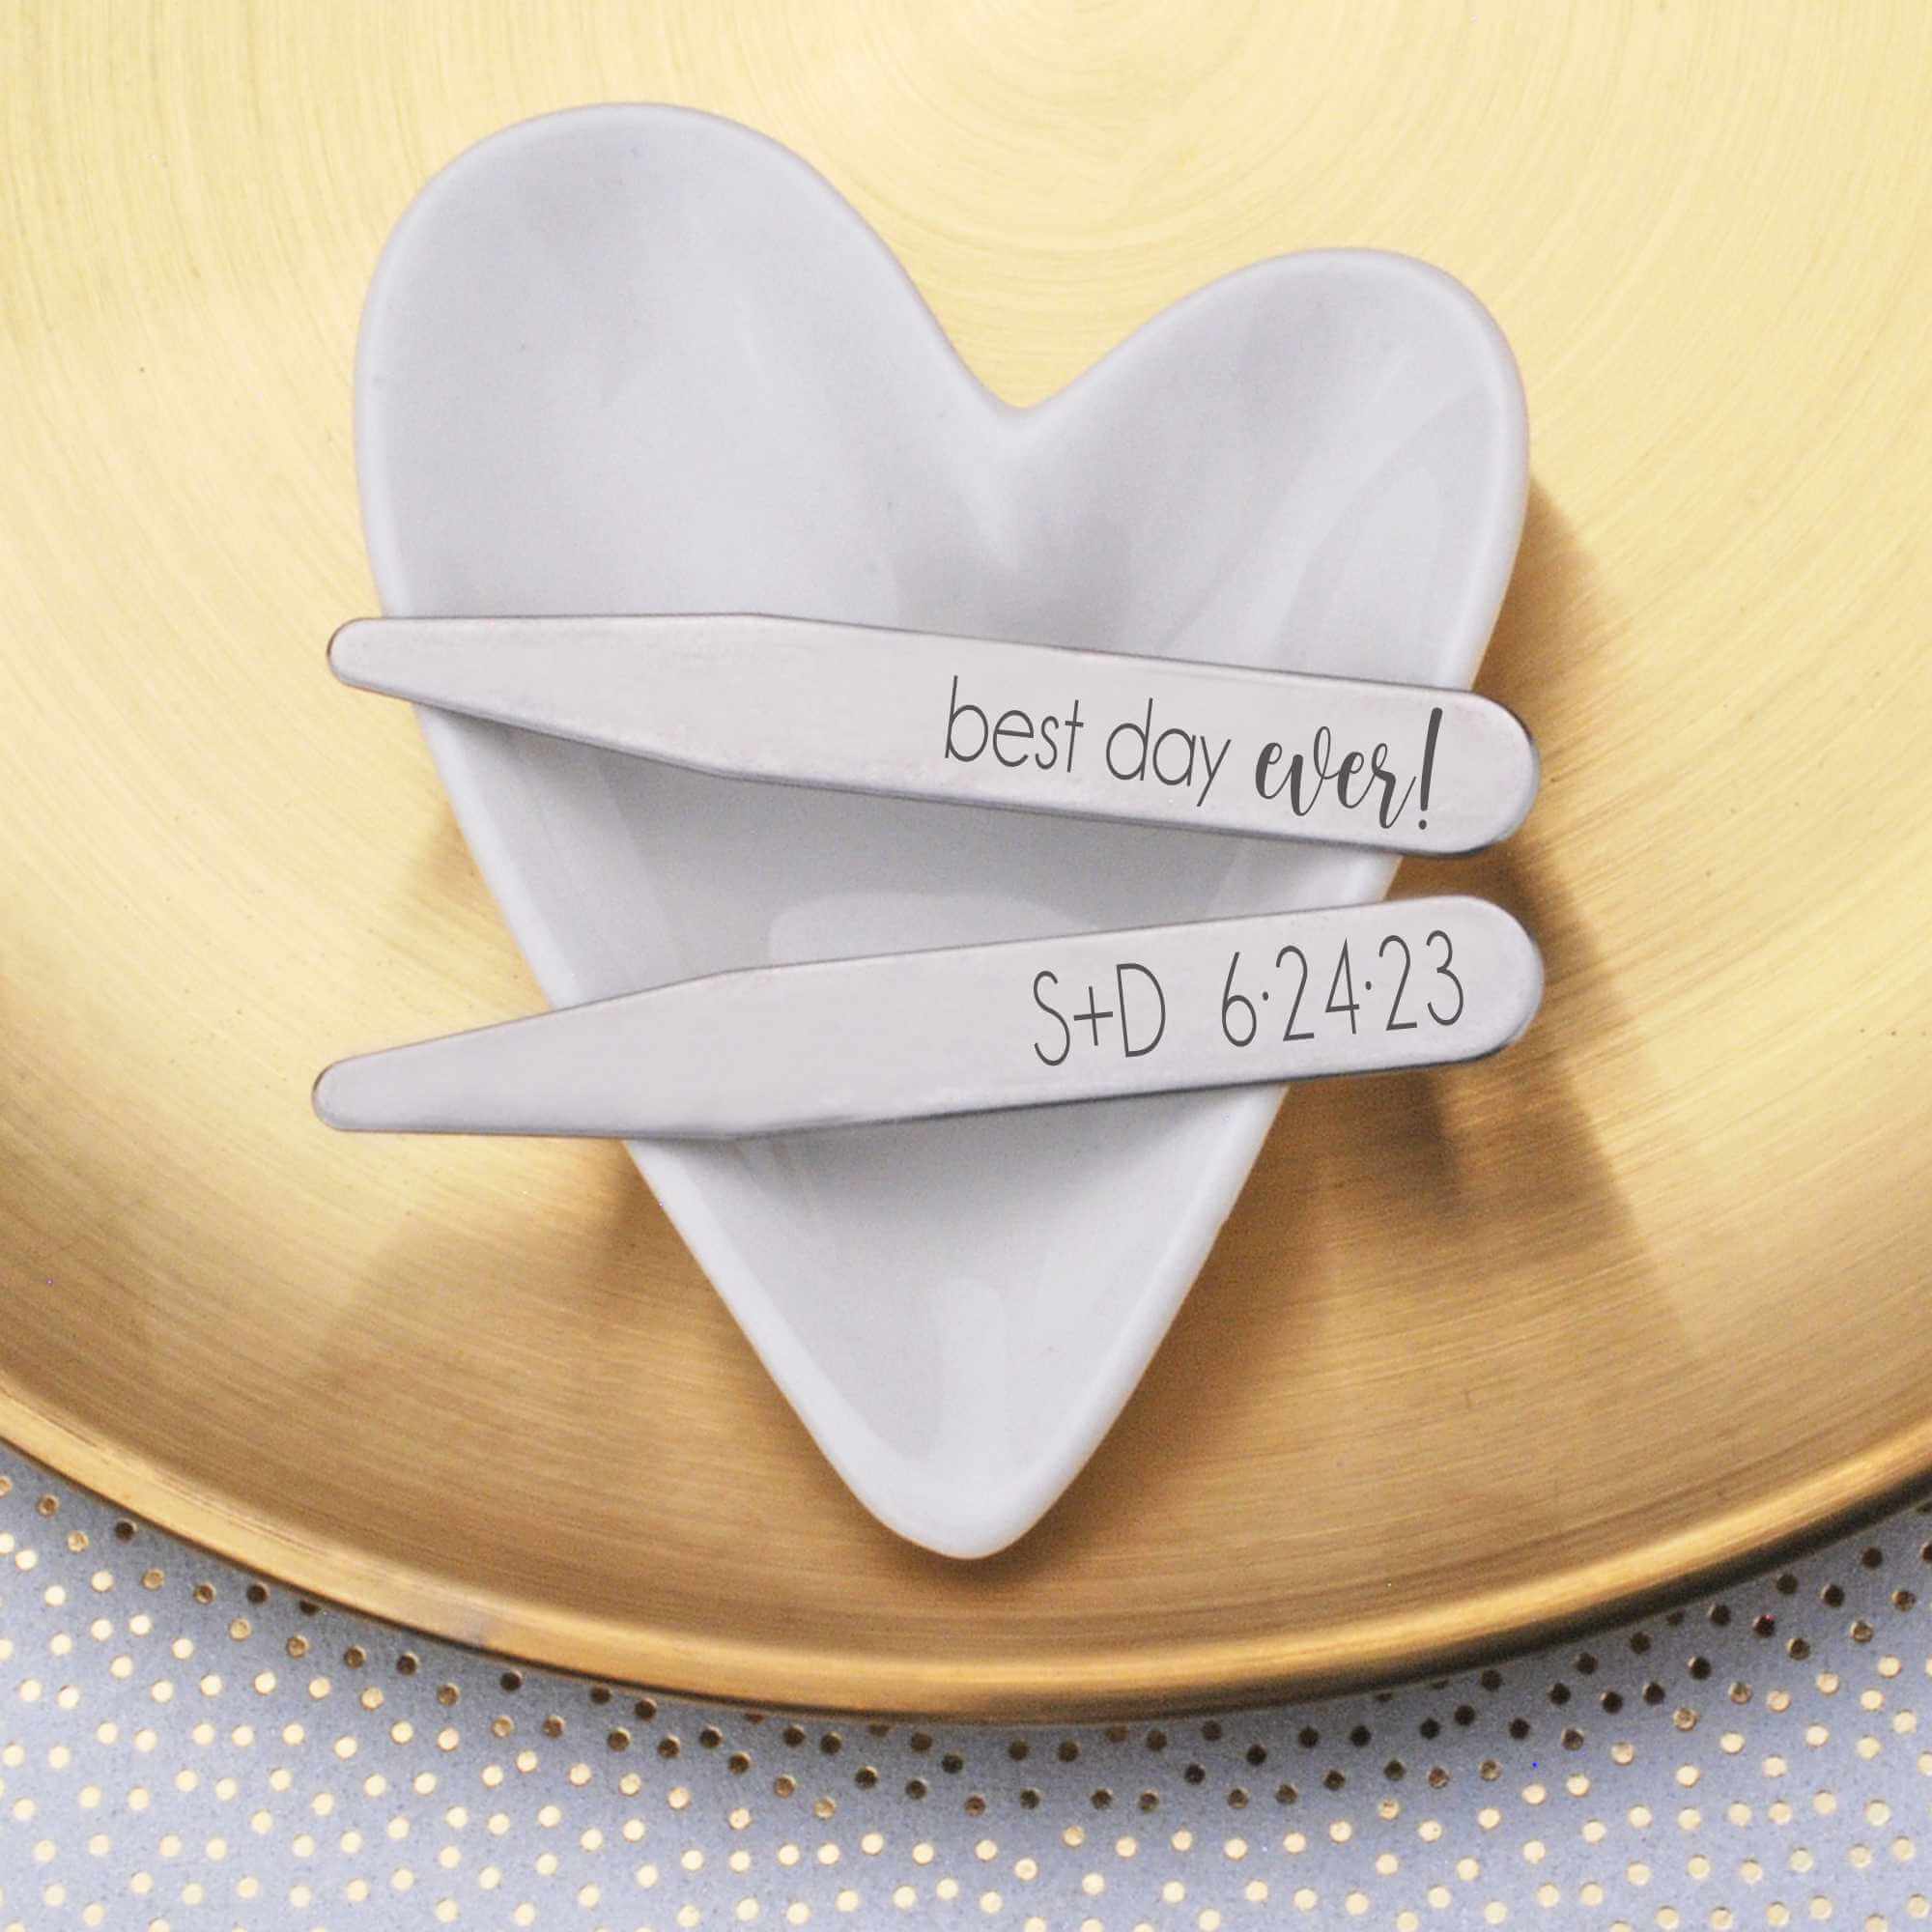 Best Day Ever - Collar Stays